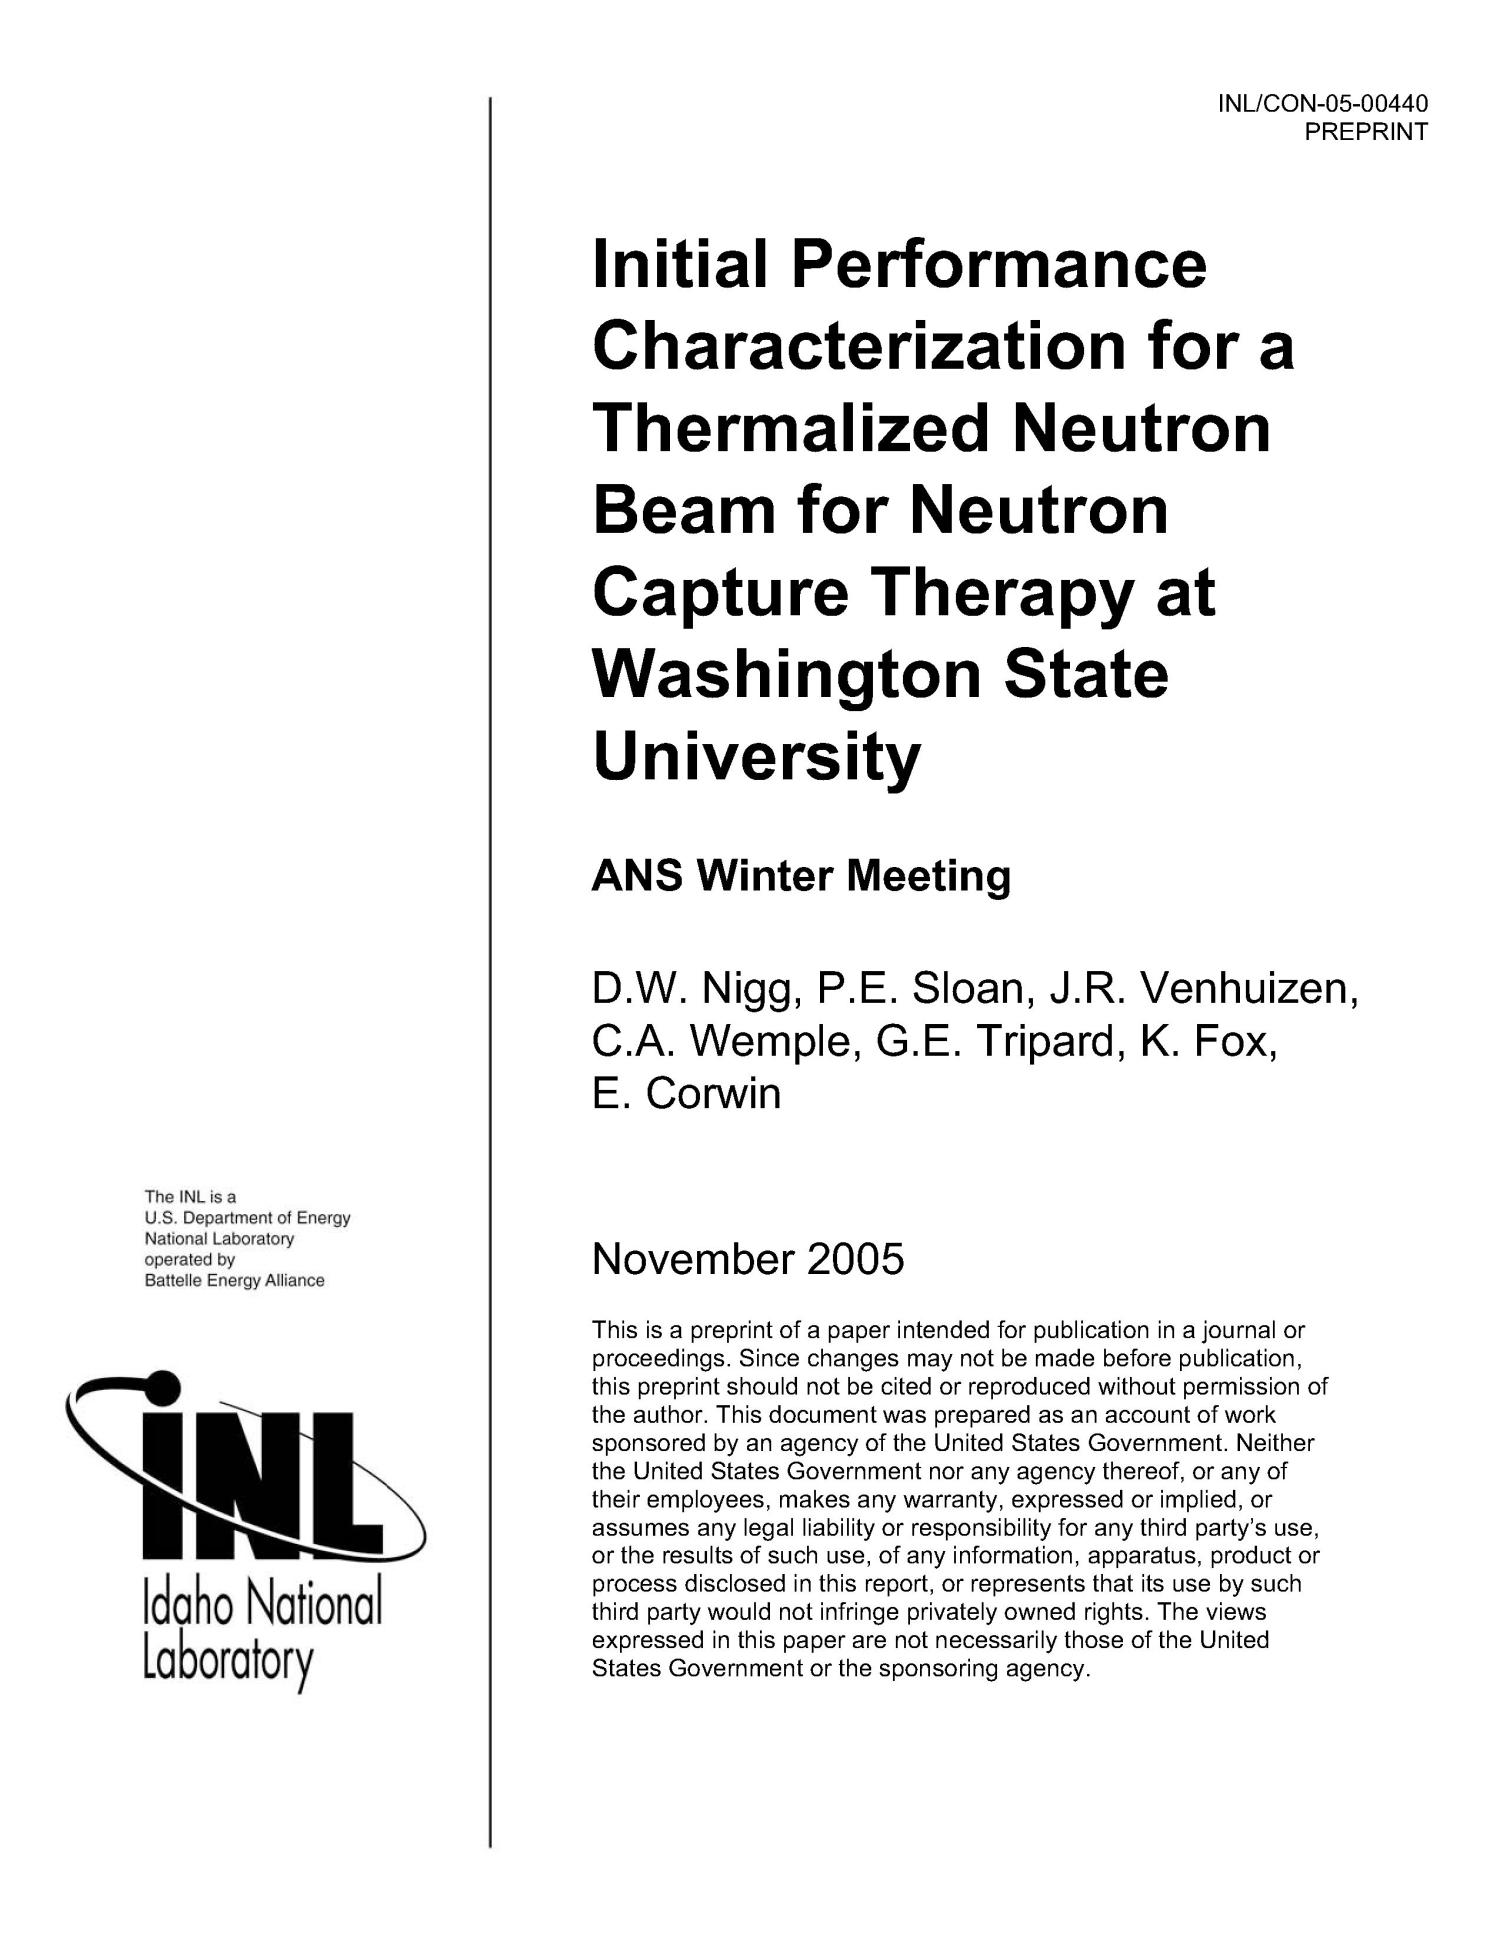 Initial Performance Characterization for a Thermalized Neutron Beam for Neutron Capture Therapy Research at Washington State University
                                                
                                                    [Sequence #]: 1 of 4
                                                